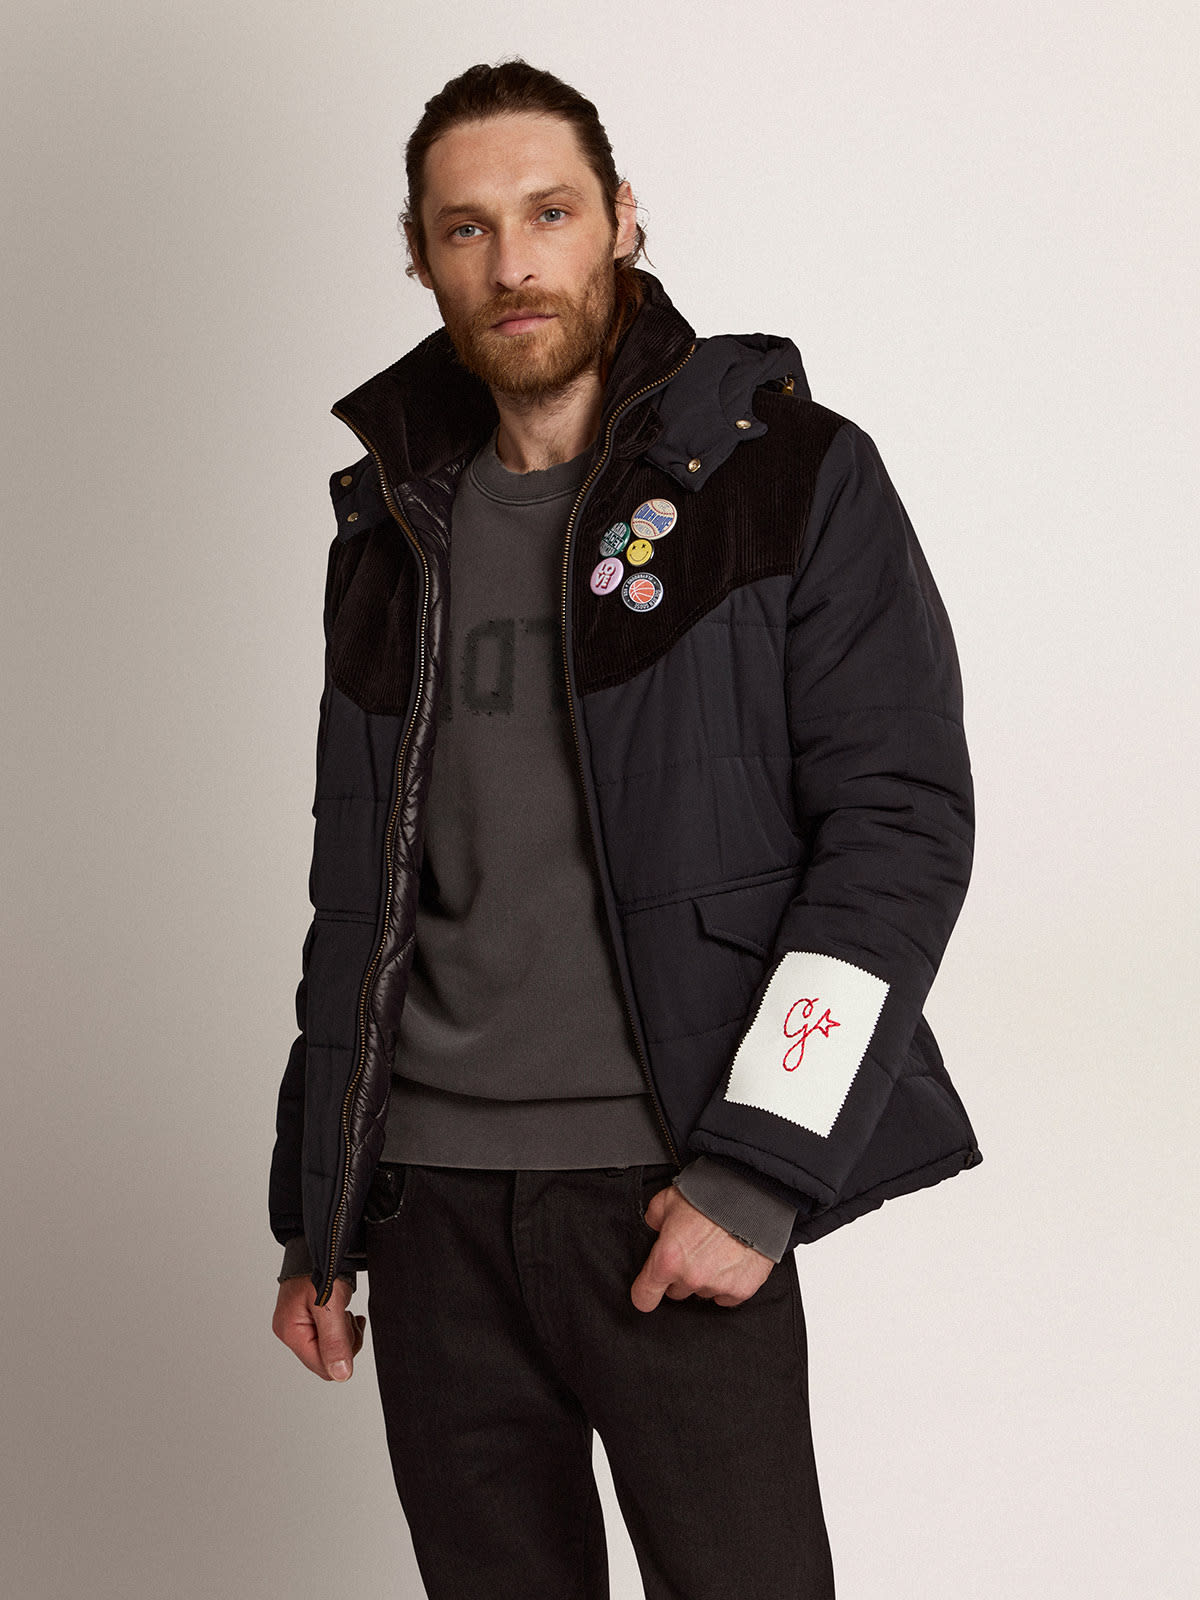 Golden Goose - Padded jacket in dark blue nylon and black cotton corduroy in 